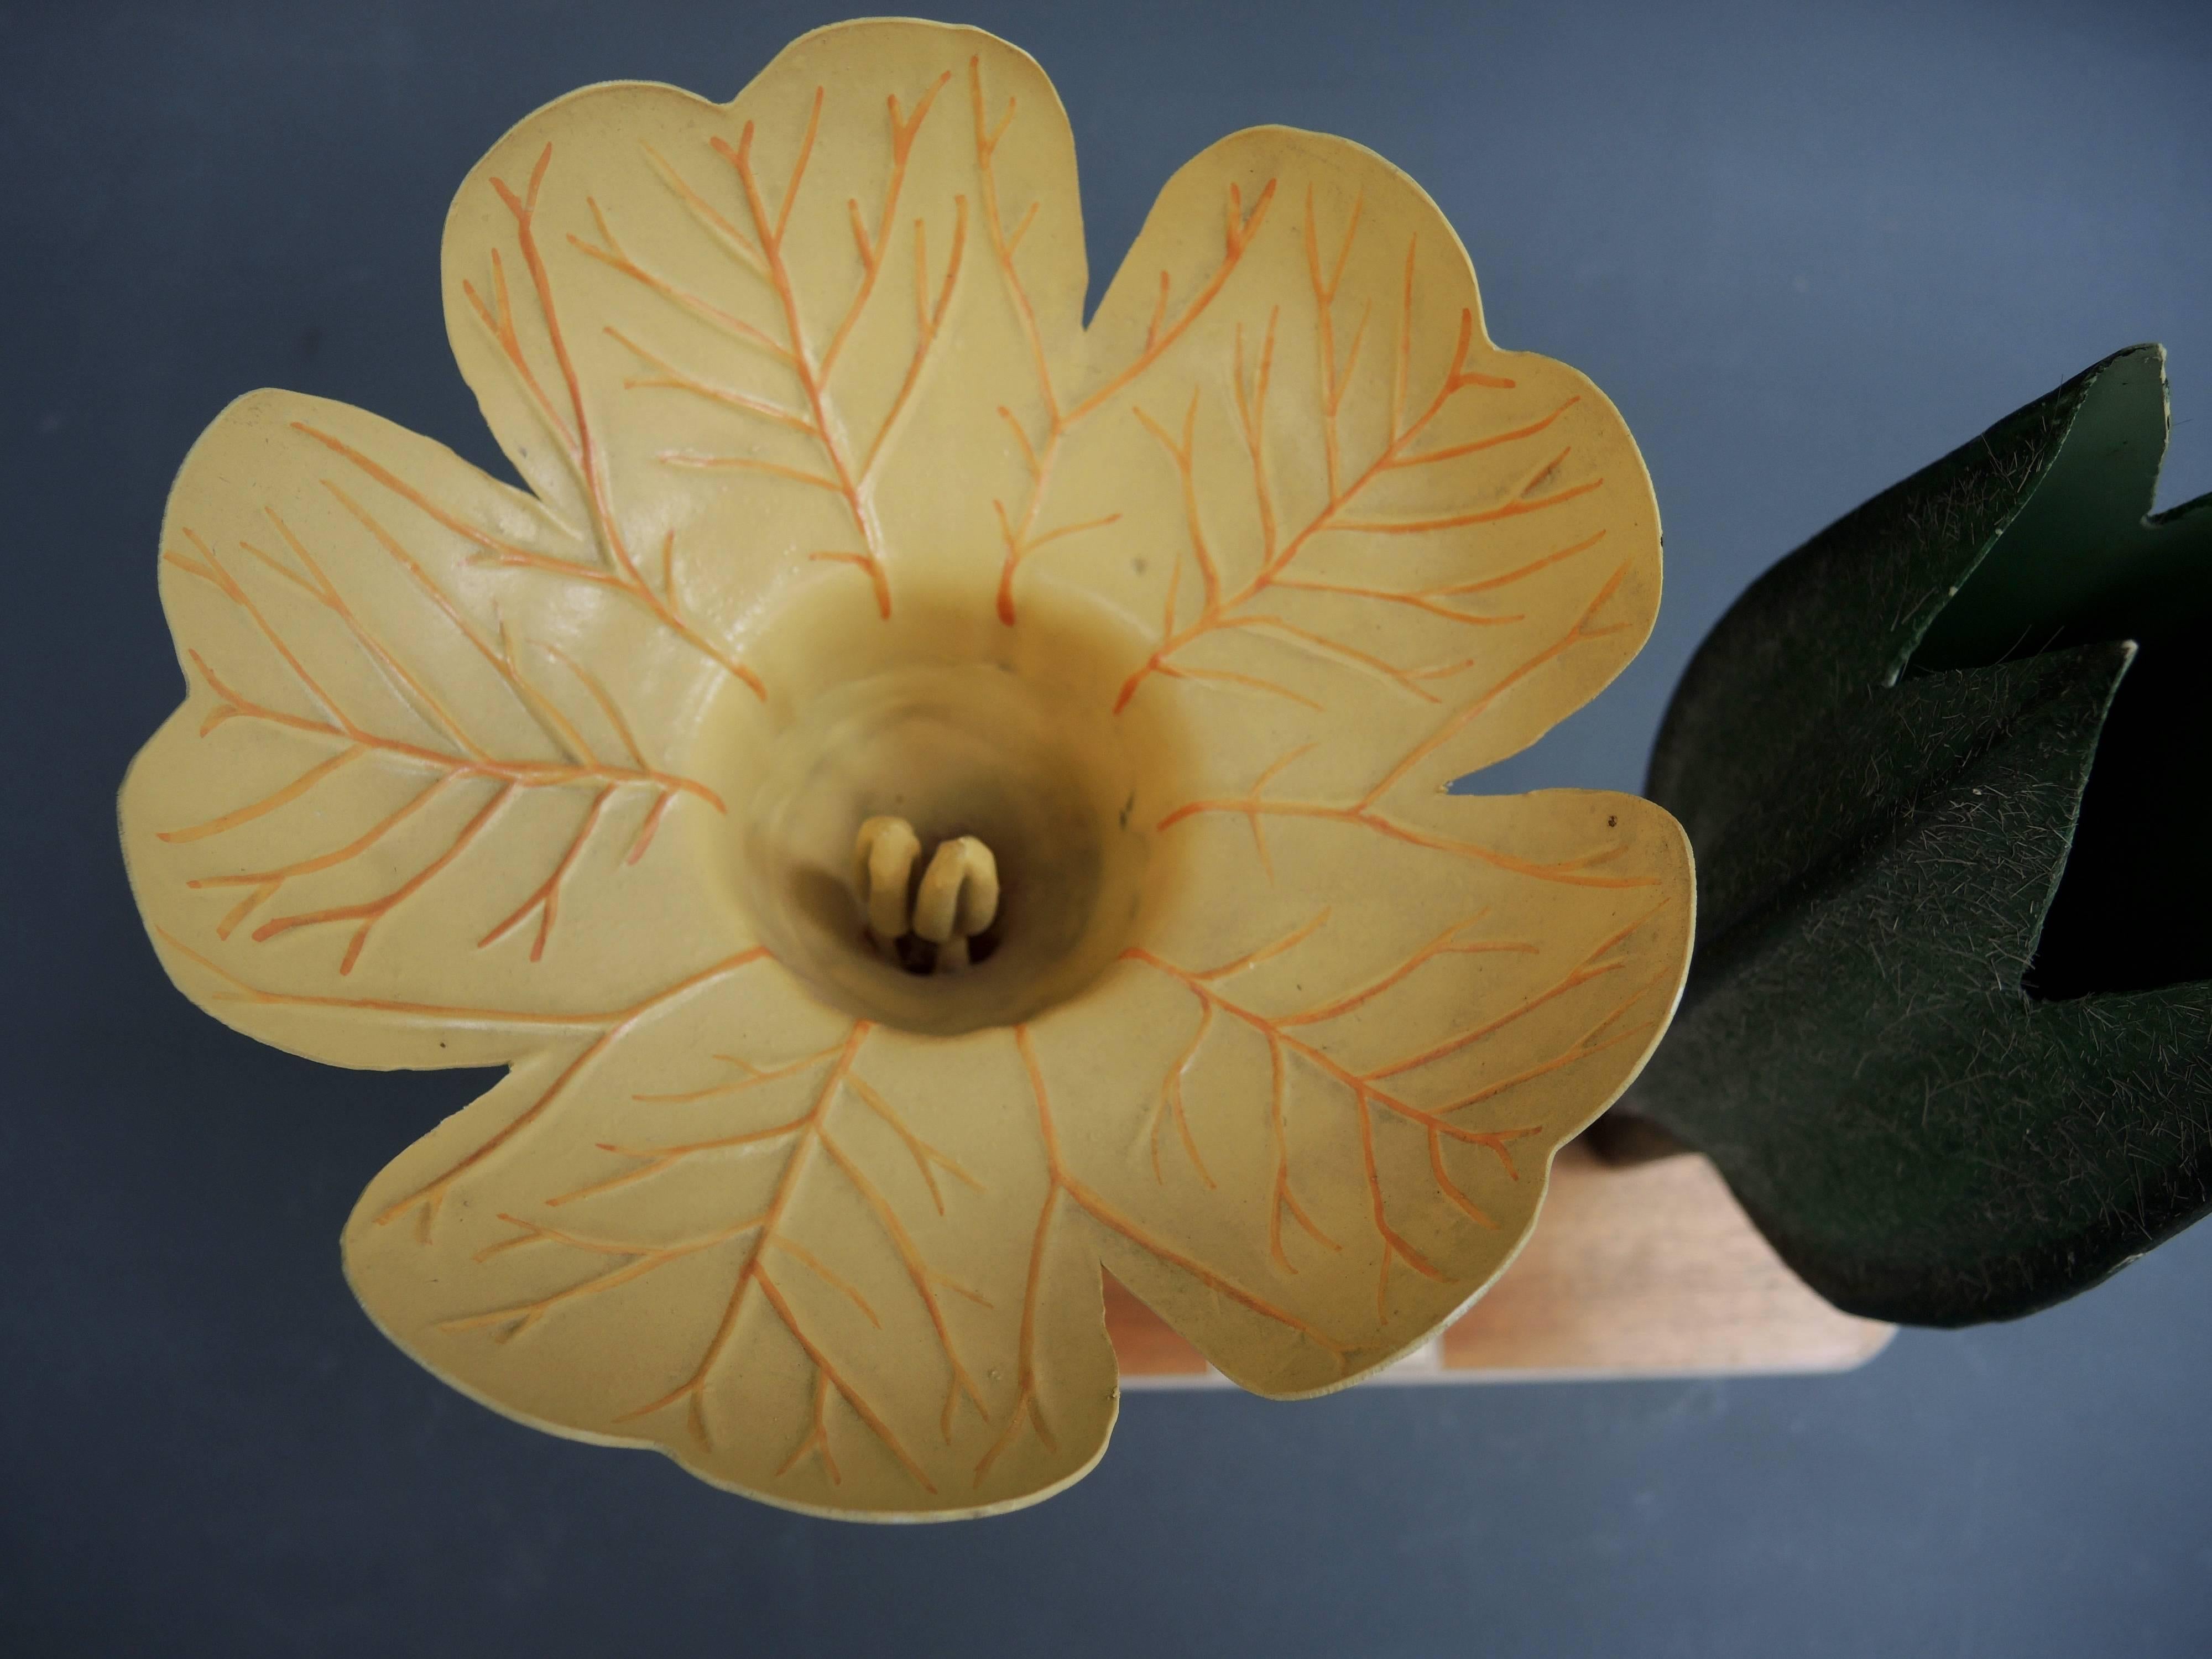 This is a Belgian midcentury teaching model of Primula Veris, commonly known as a cowslip primrose. Constructed is a thin molded synthetic with clear fiberglass textures on the leaves. Because of the brittle nature of midcentury plastics when